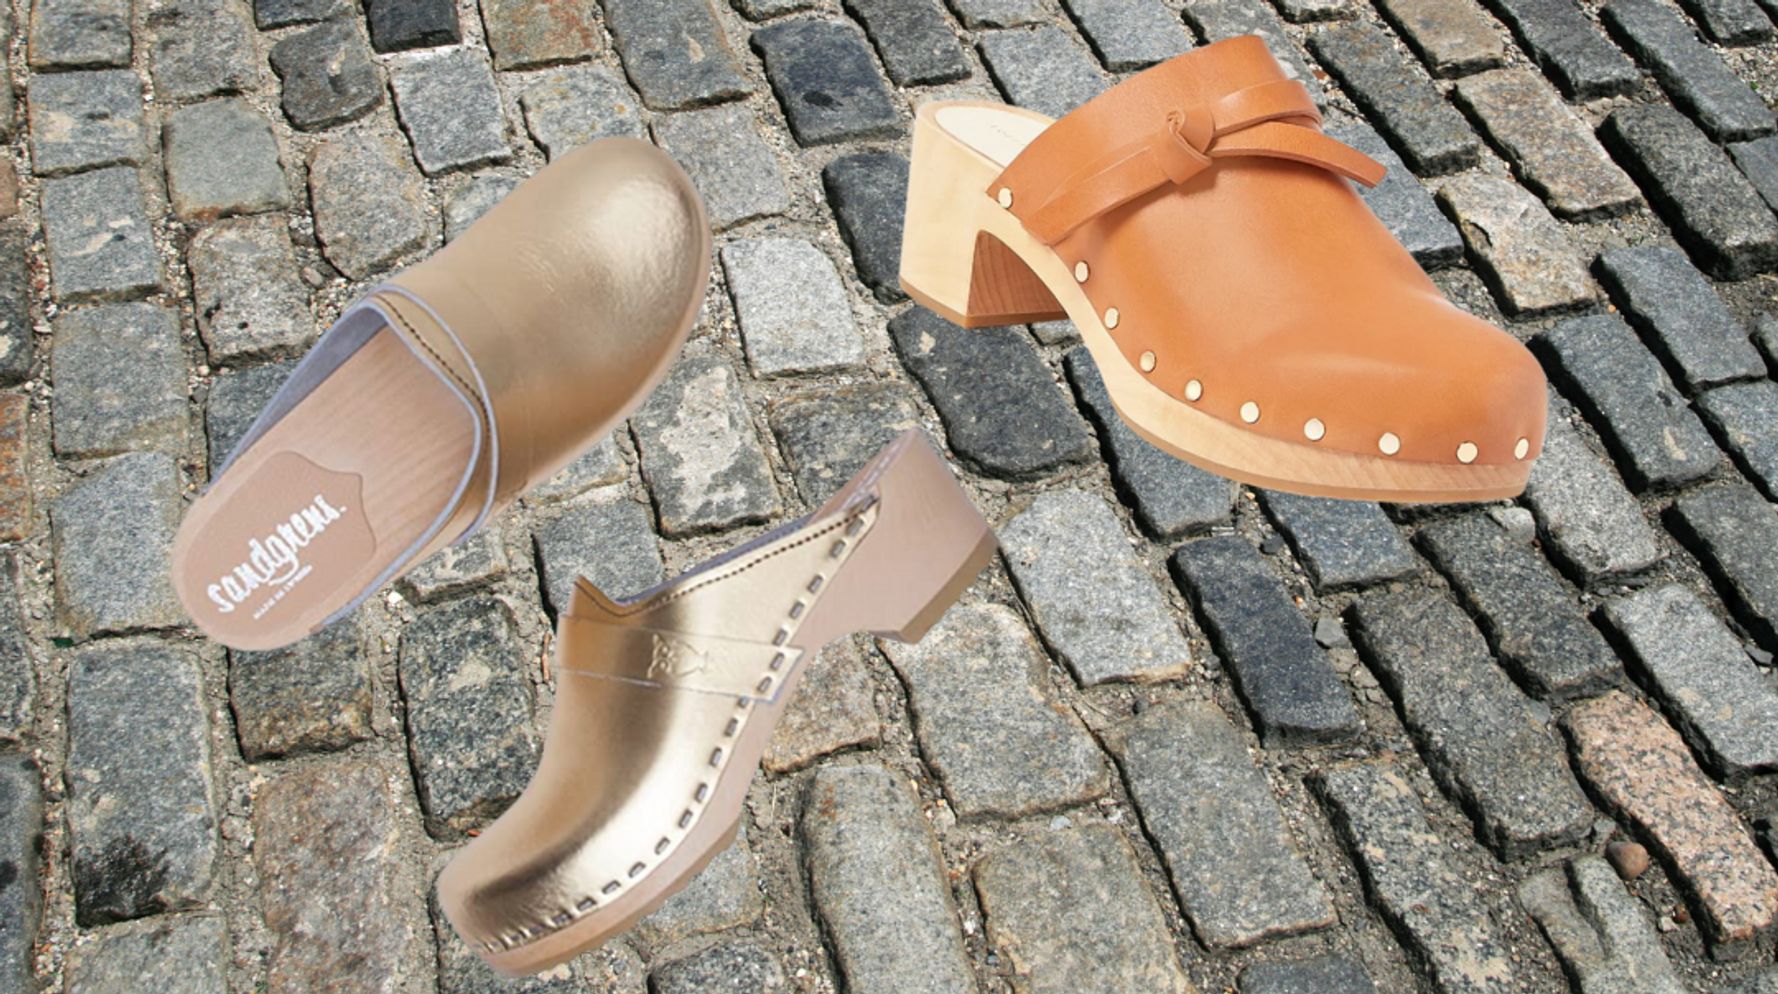 Stylish Clogs To Transition Your Summer Wardrobe To Fall